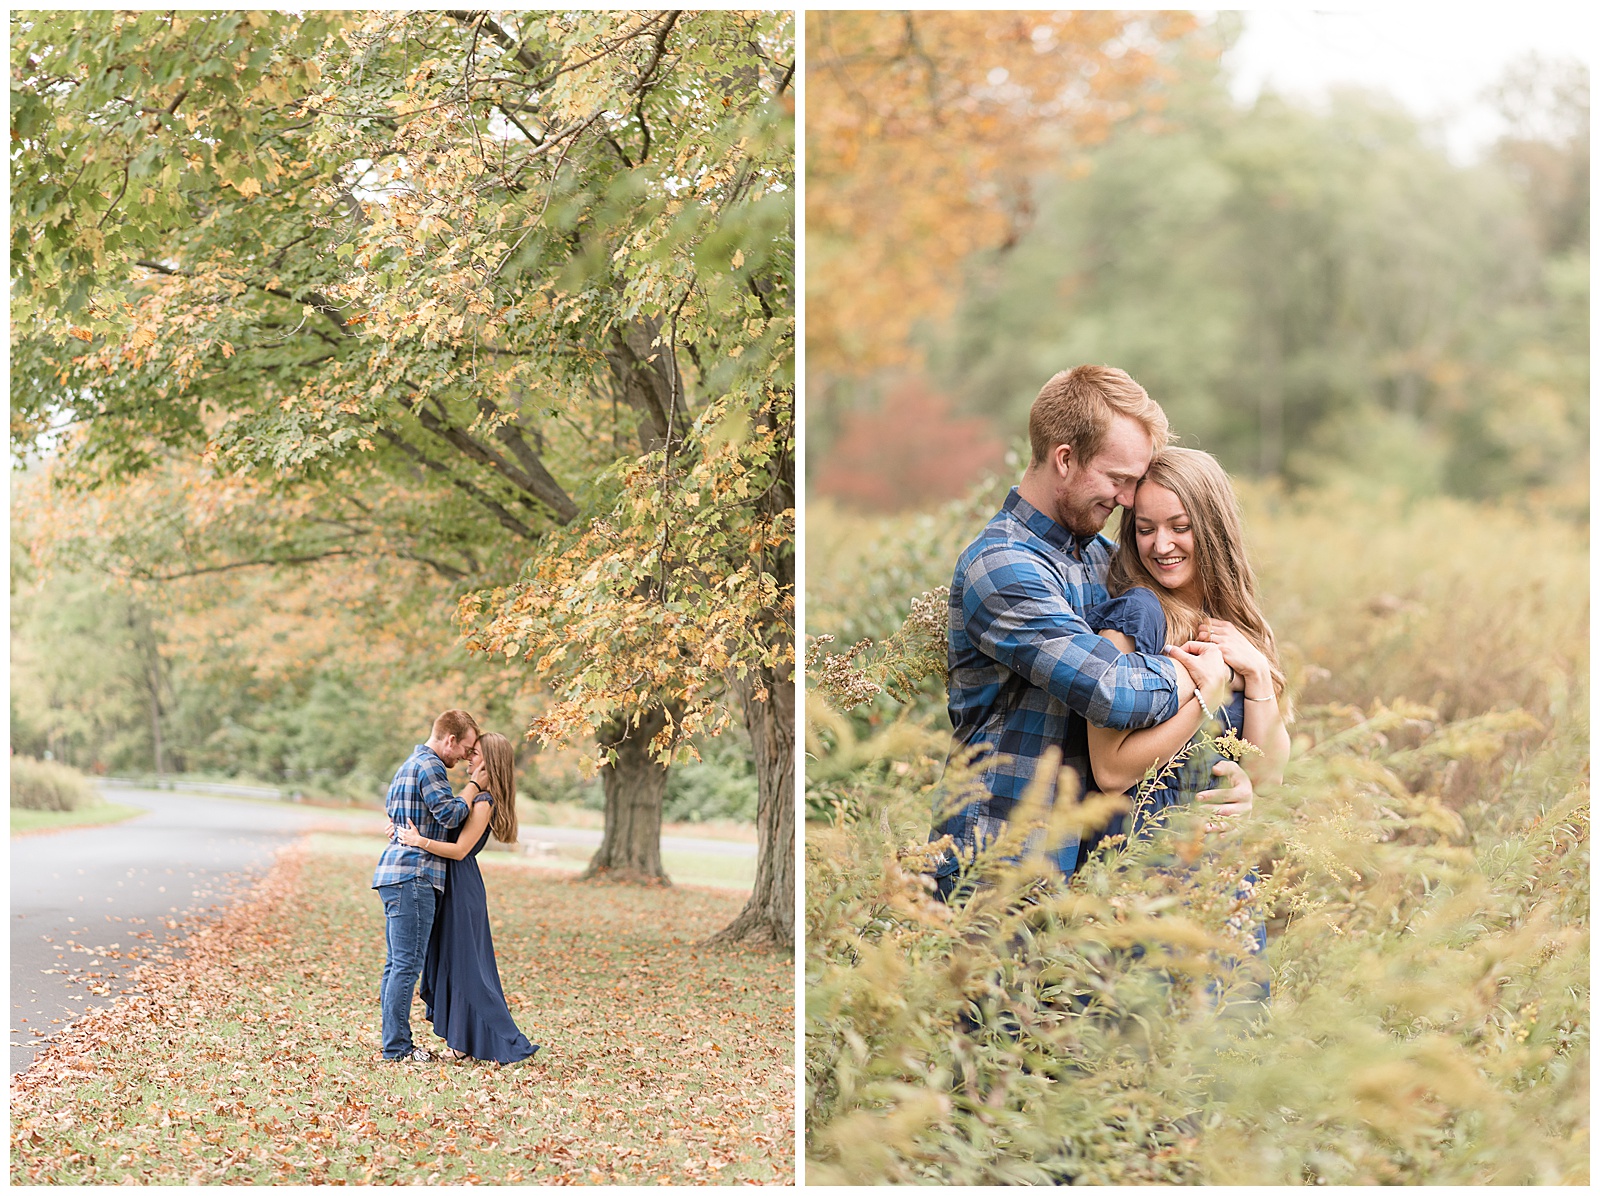 engaged couple hugging on grass covered in fallen leaves by row of trees with their leaves changing colors